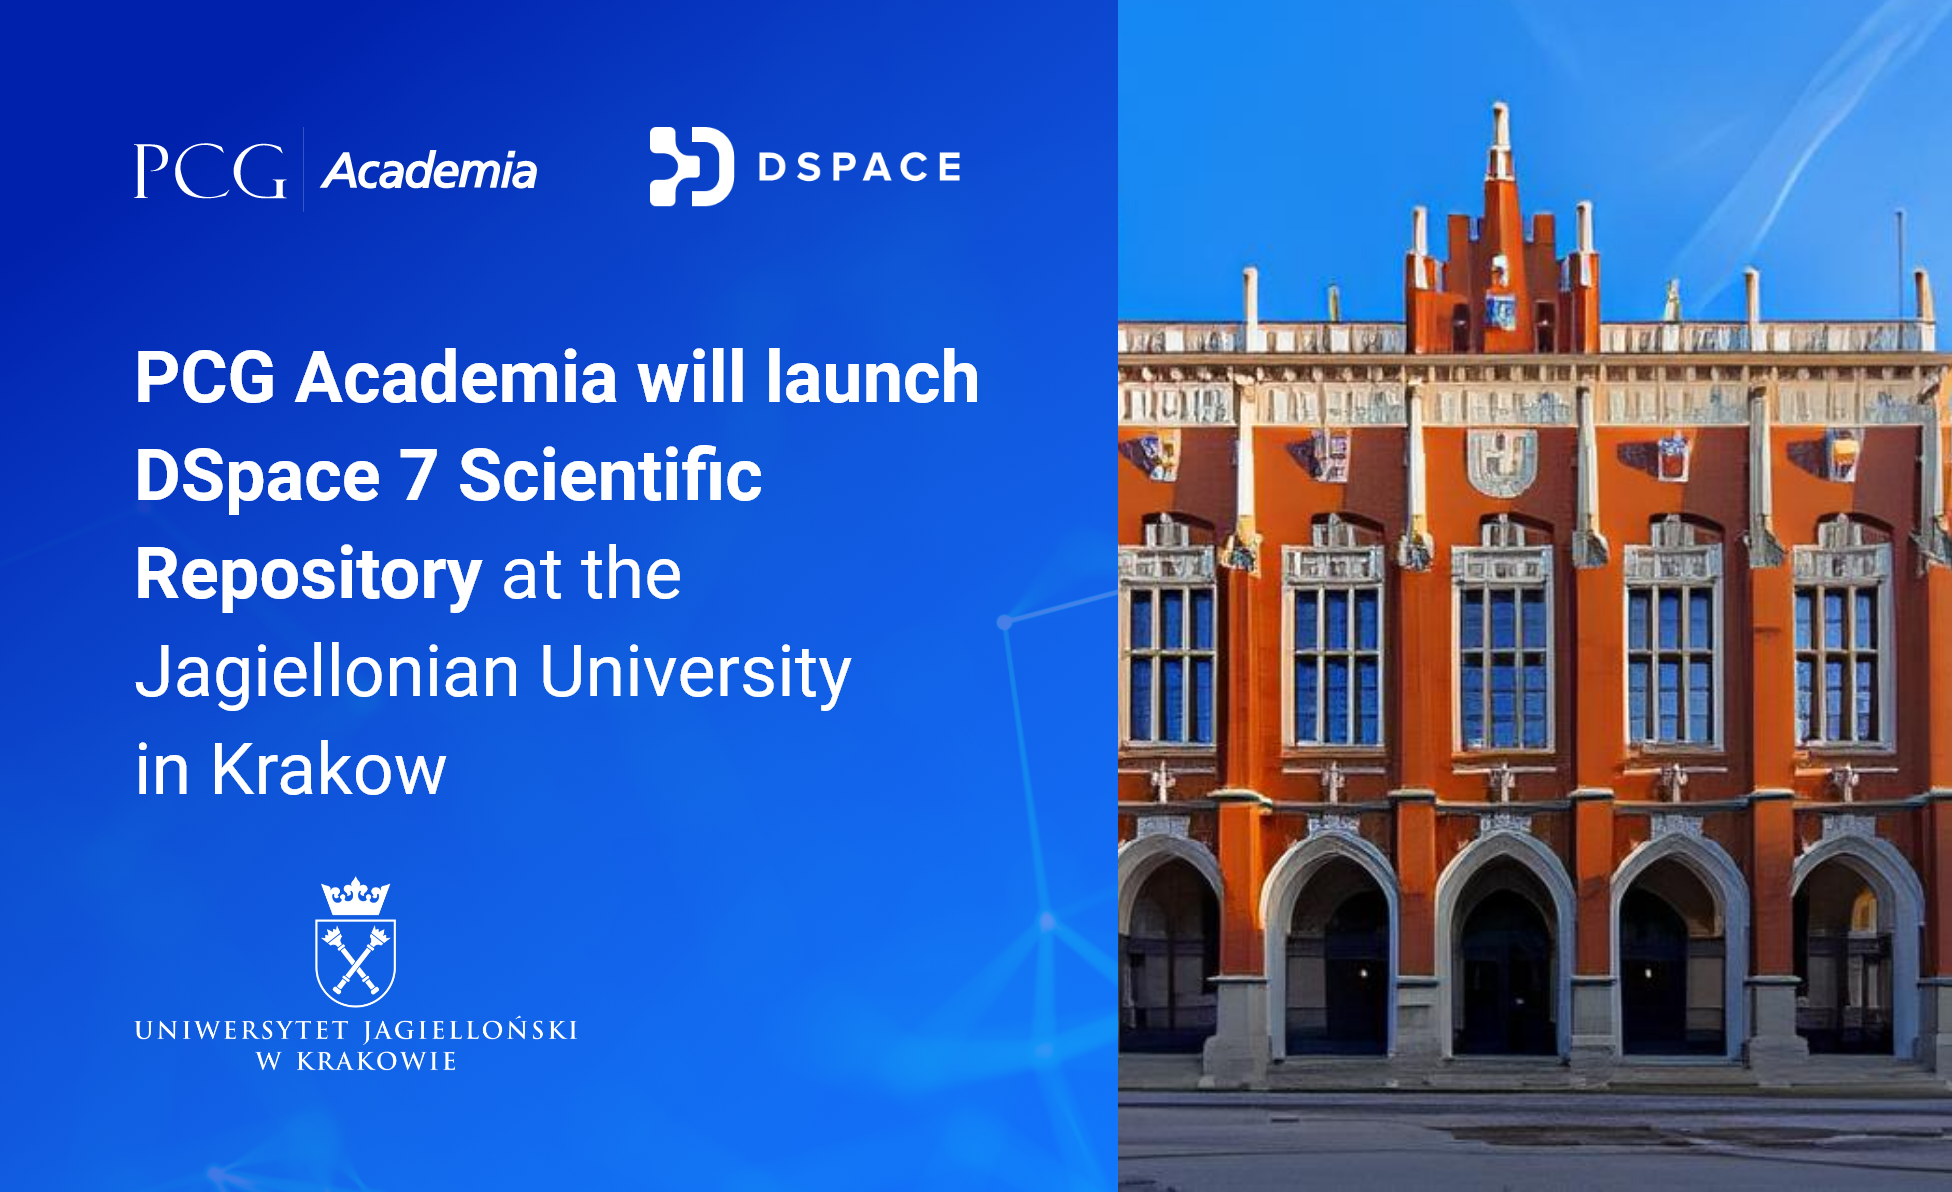 PCG Academia will launch DSpace 7 Scientific Repository at the Jagiellonian University in Krakow